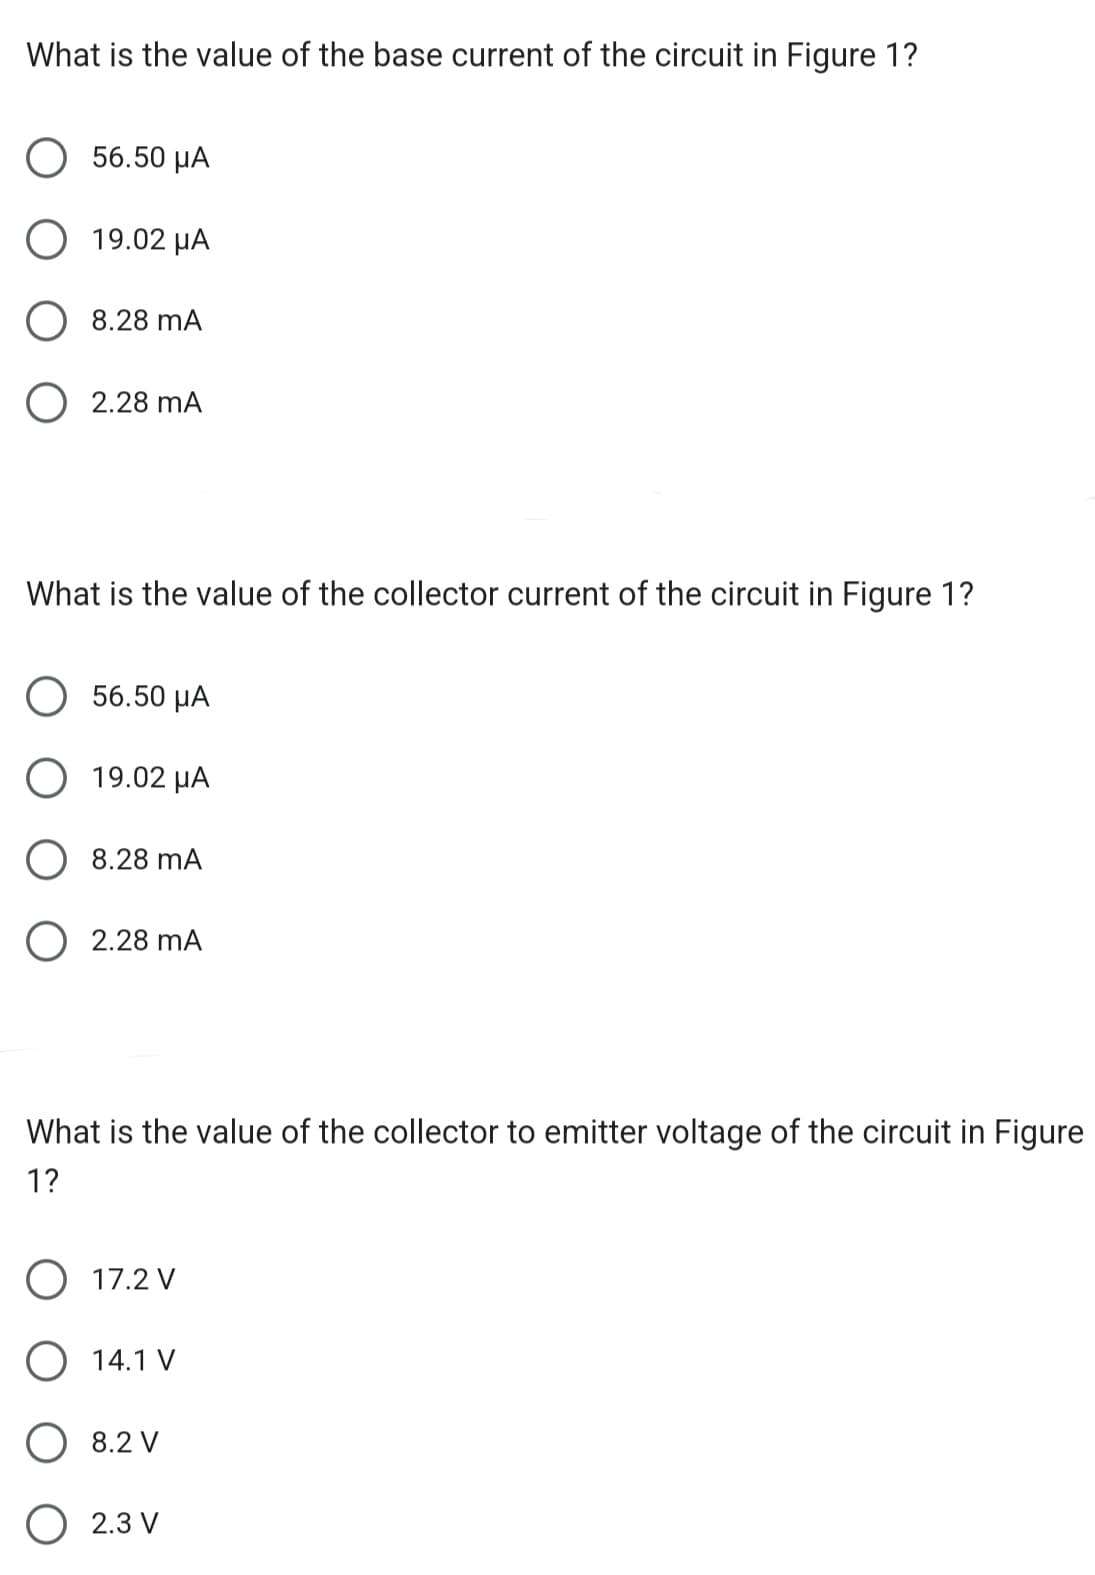 What is the value of the base current of the circuit in Figure 1?
56.50 μA
19.02 με
8.28 mA
O 2.28 MA
What is the value of the collector current of the circuit in Figure 1?
56.50 μA
19.02 μA
8.28 mA
O 2.28 mA
What is the value of the collector to emitter voltage of the circuit in Figure
1?
O 17.2 V
O 14.1 V
8.2 V
2.3 V